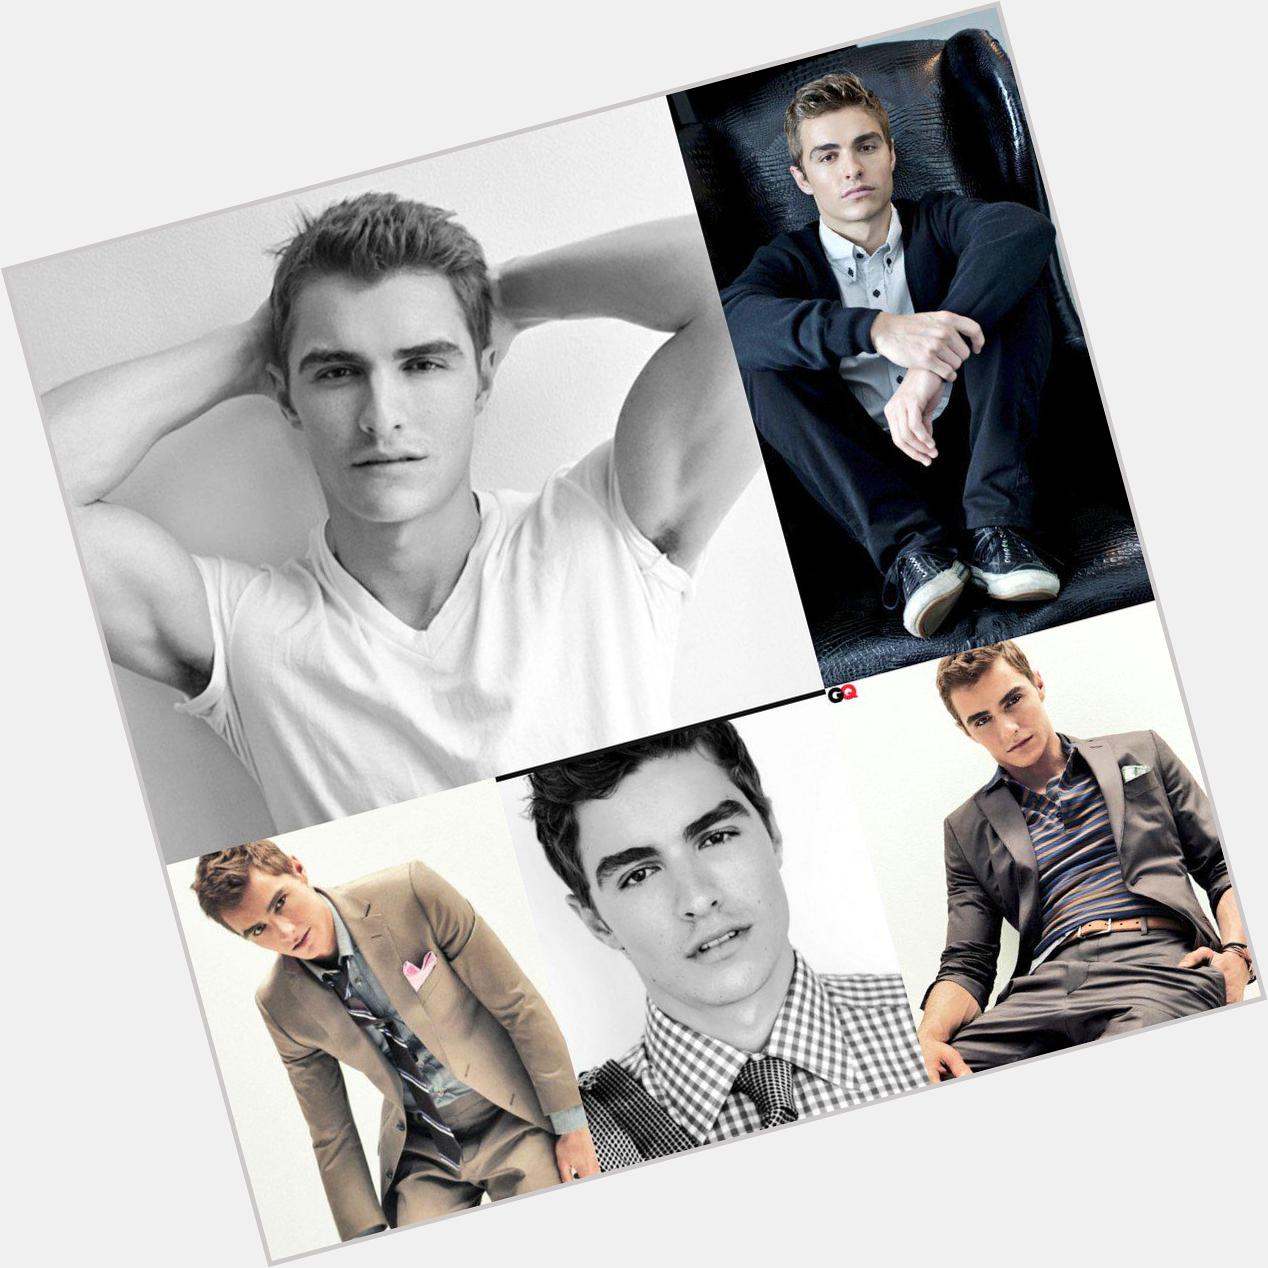 So blessed to share a birthday with the hottest man alive. Happy birthday to Dave Franco.  